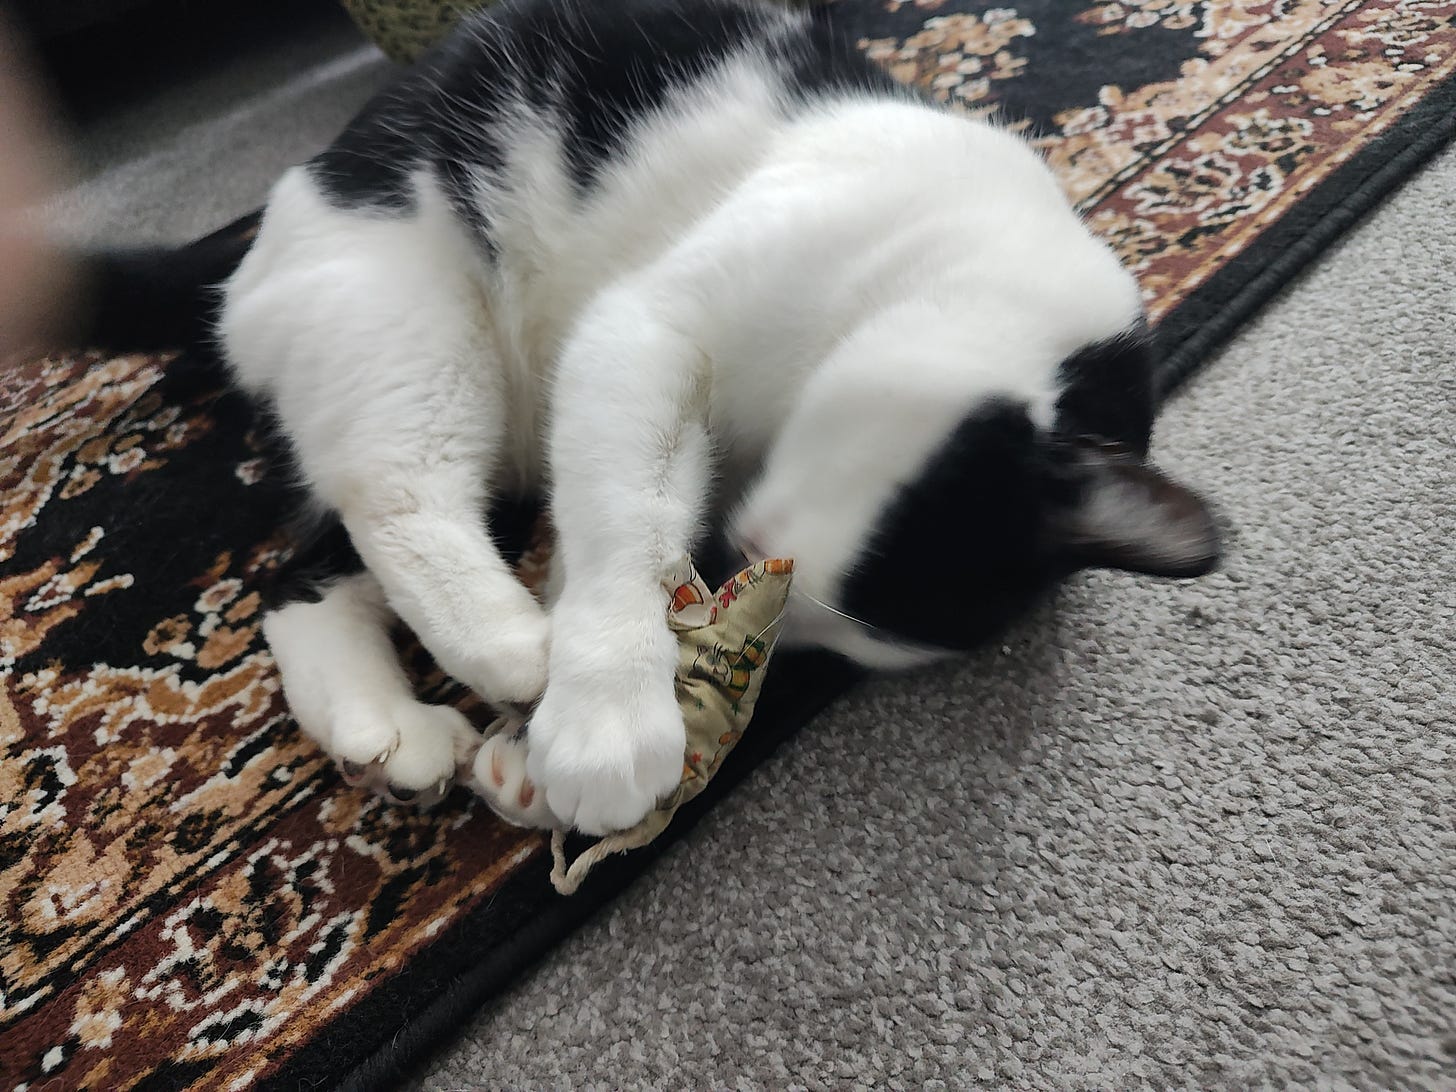 Blurry photo of a large black and white cat attacking a catnip mouse on a patterned rug.